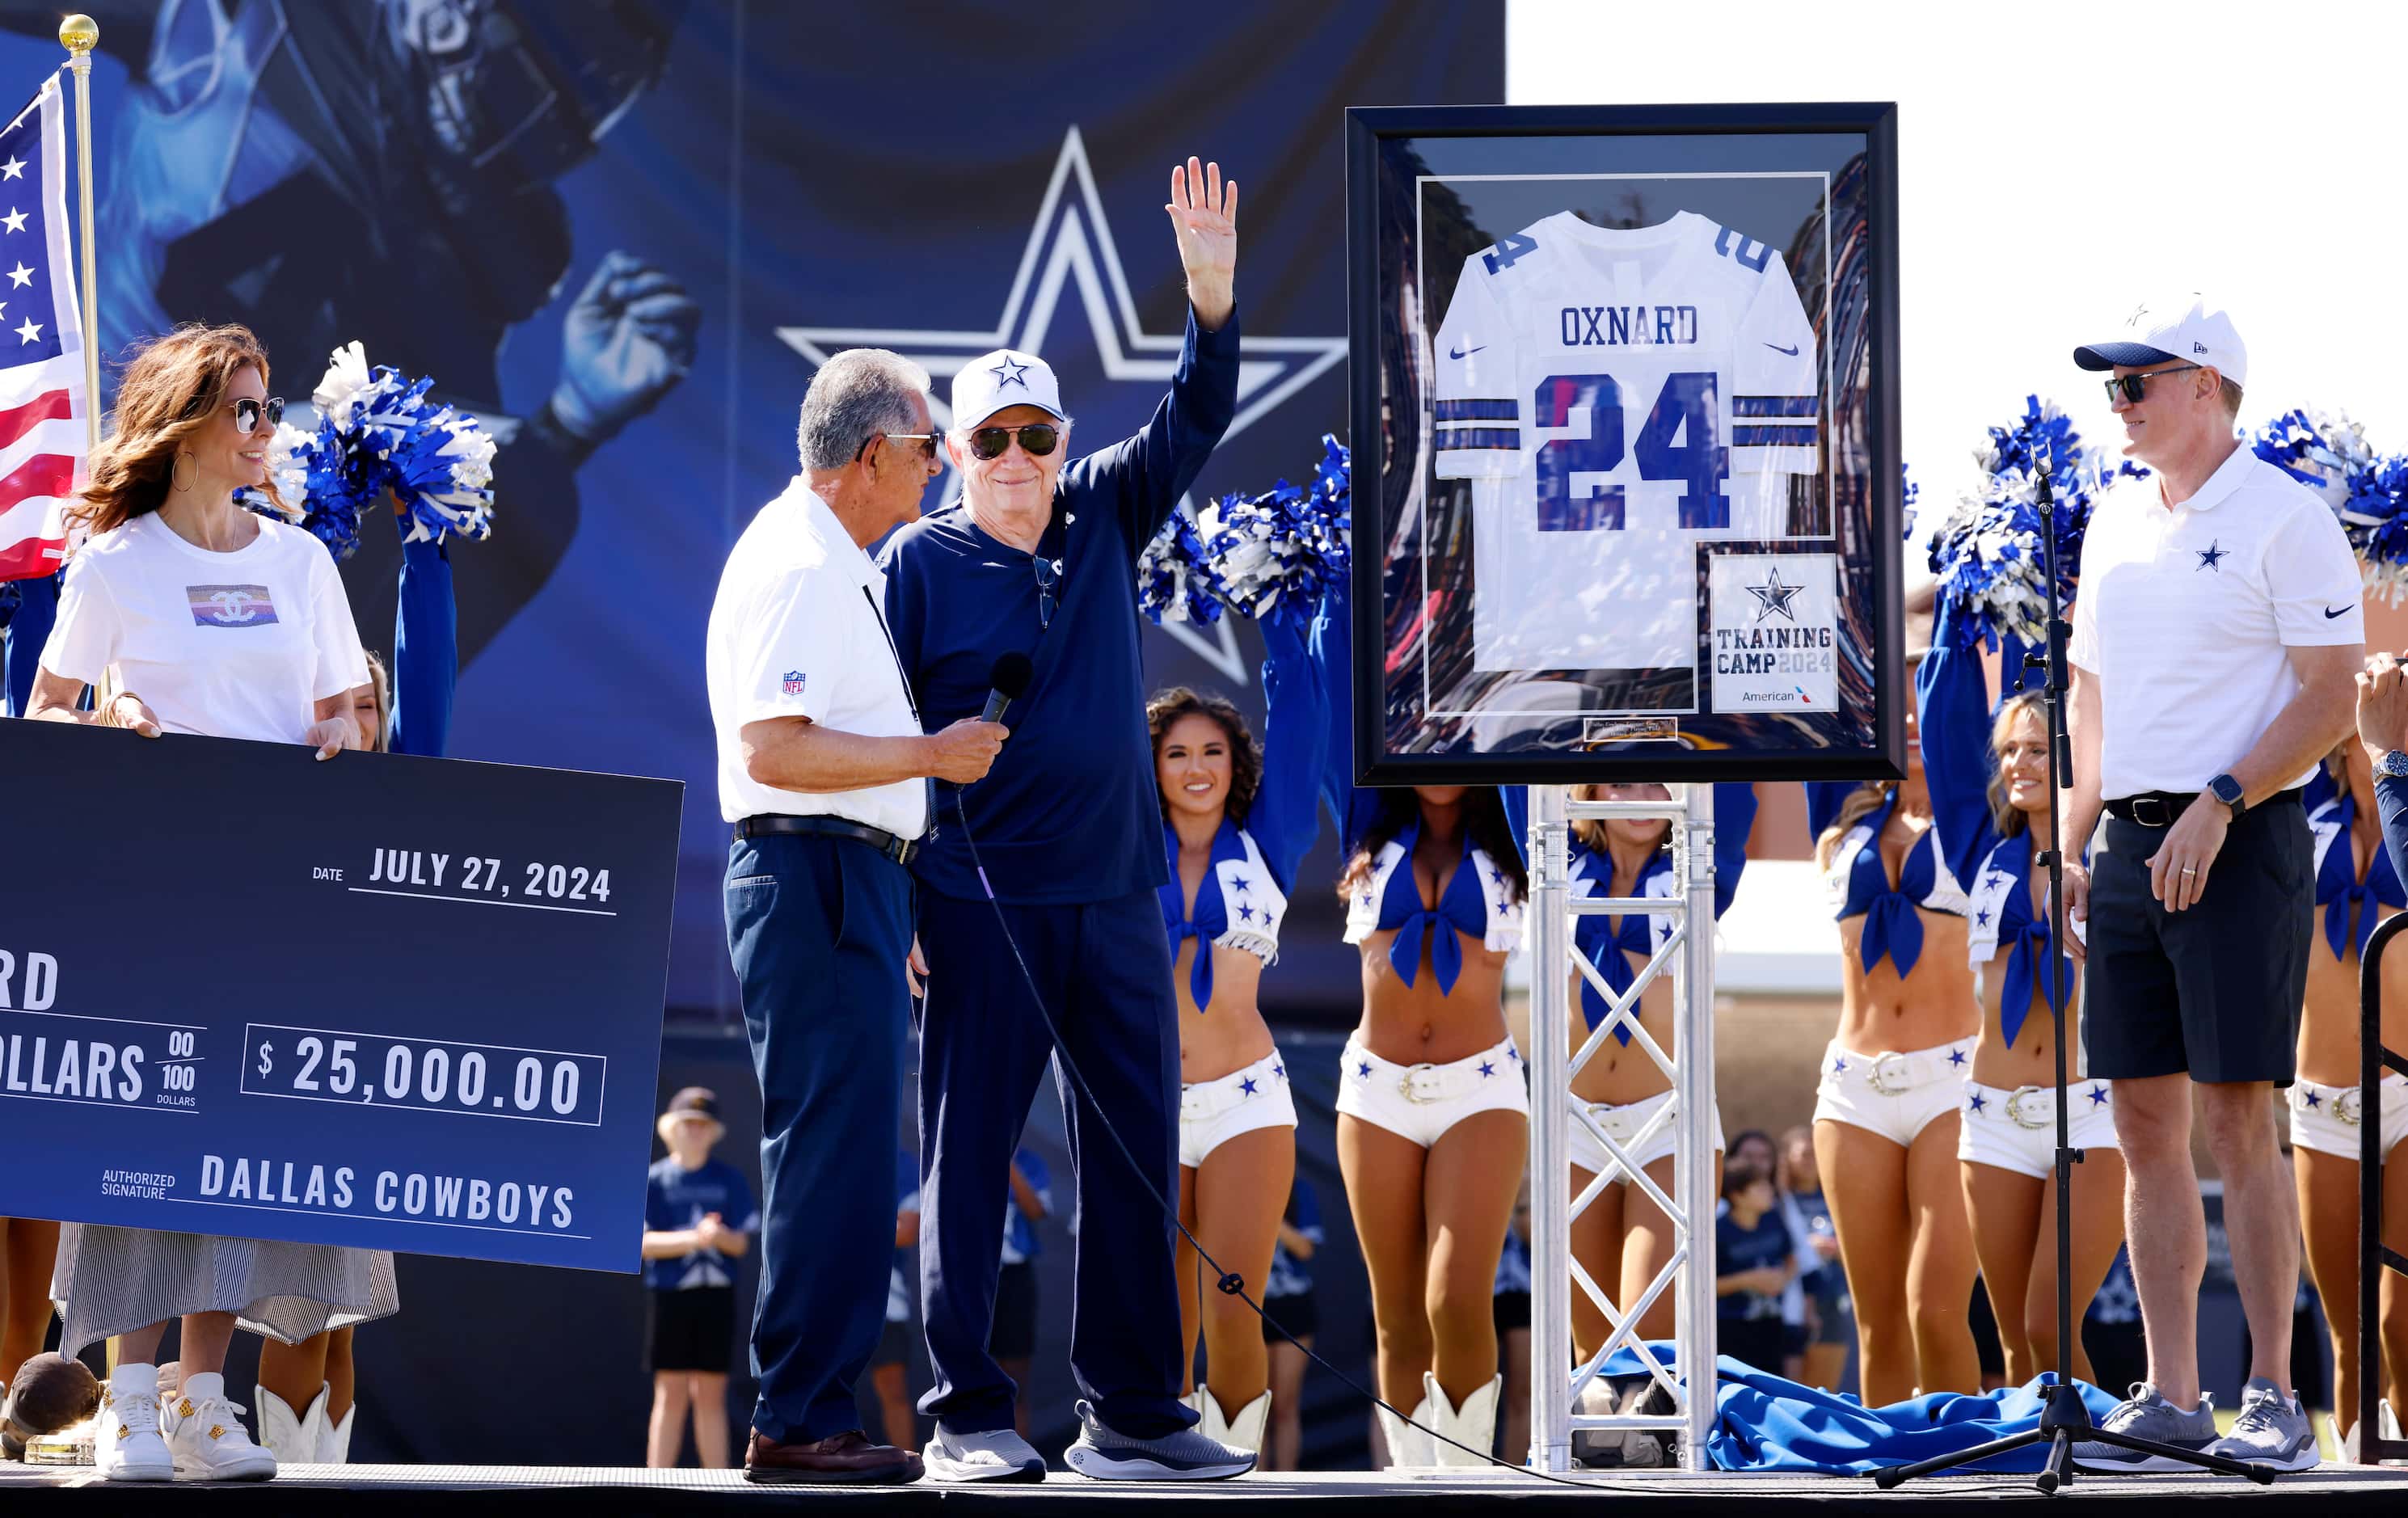 Dallas Cowboys owner Jerry Jones waves to fans after gifting a frame 24 jersey to Oxnard...